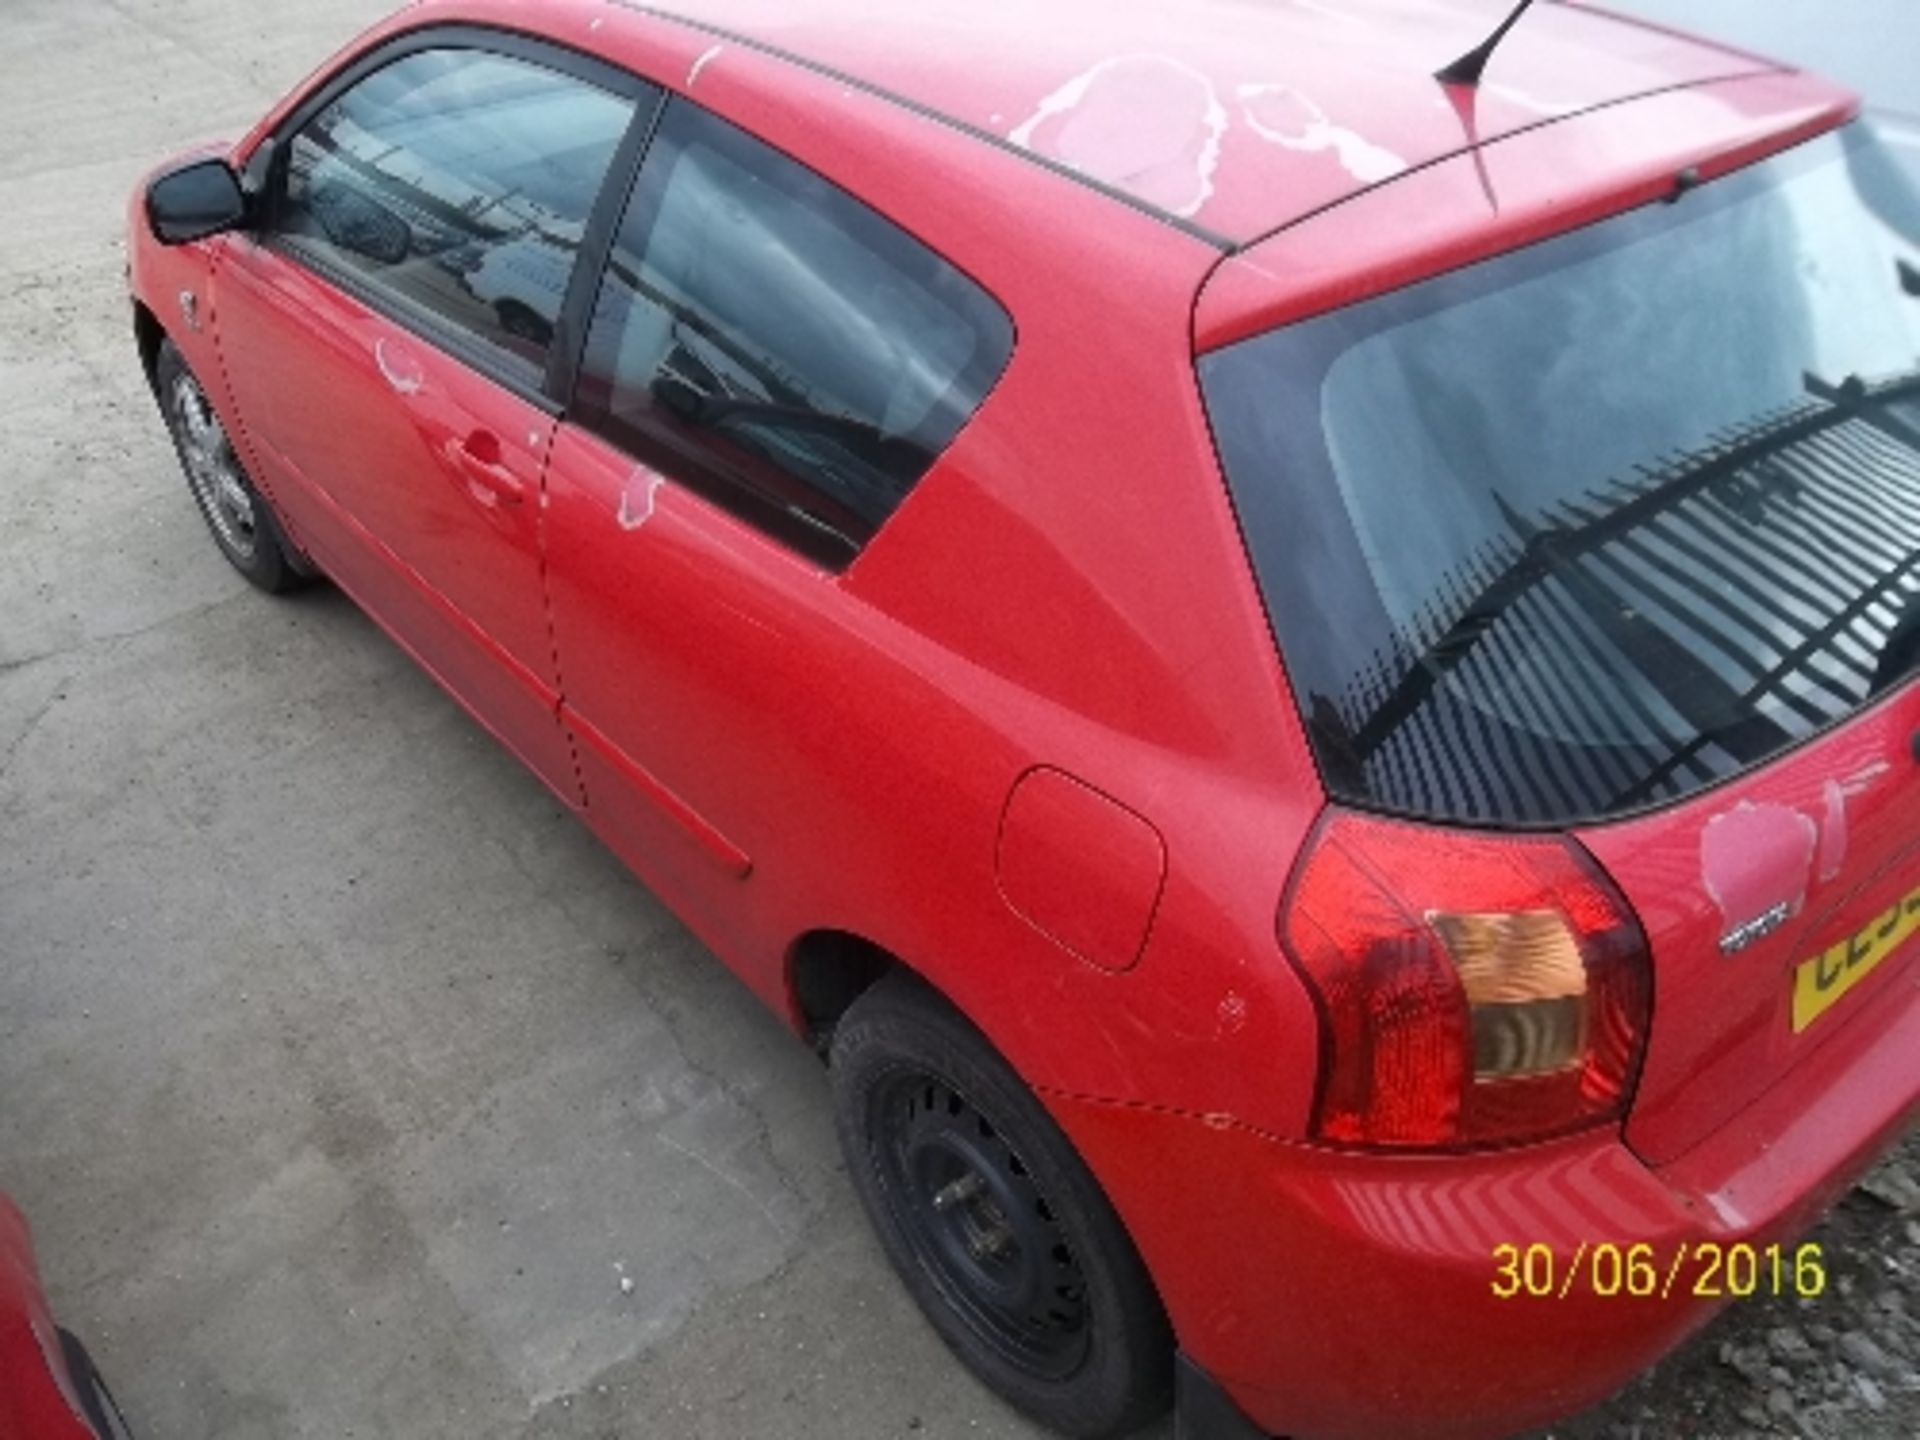 Toyota Corolla T3 VVTI - CE53 OOU Date of registration: 12.09.2003 1598cc, petrol, manual, red - Image 4 of 4